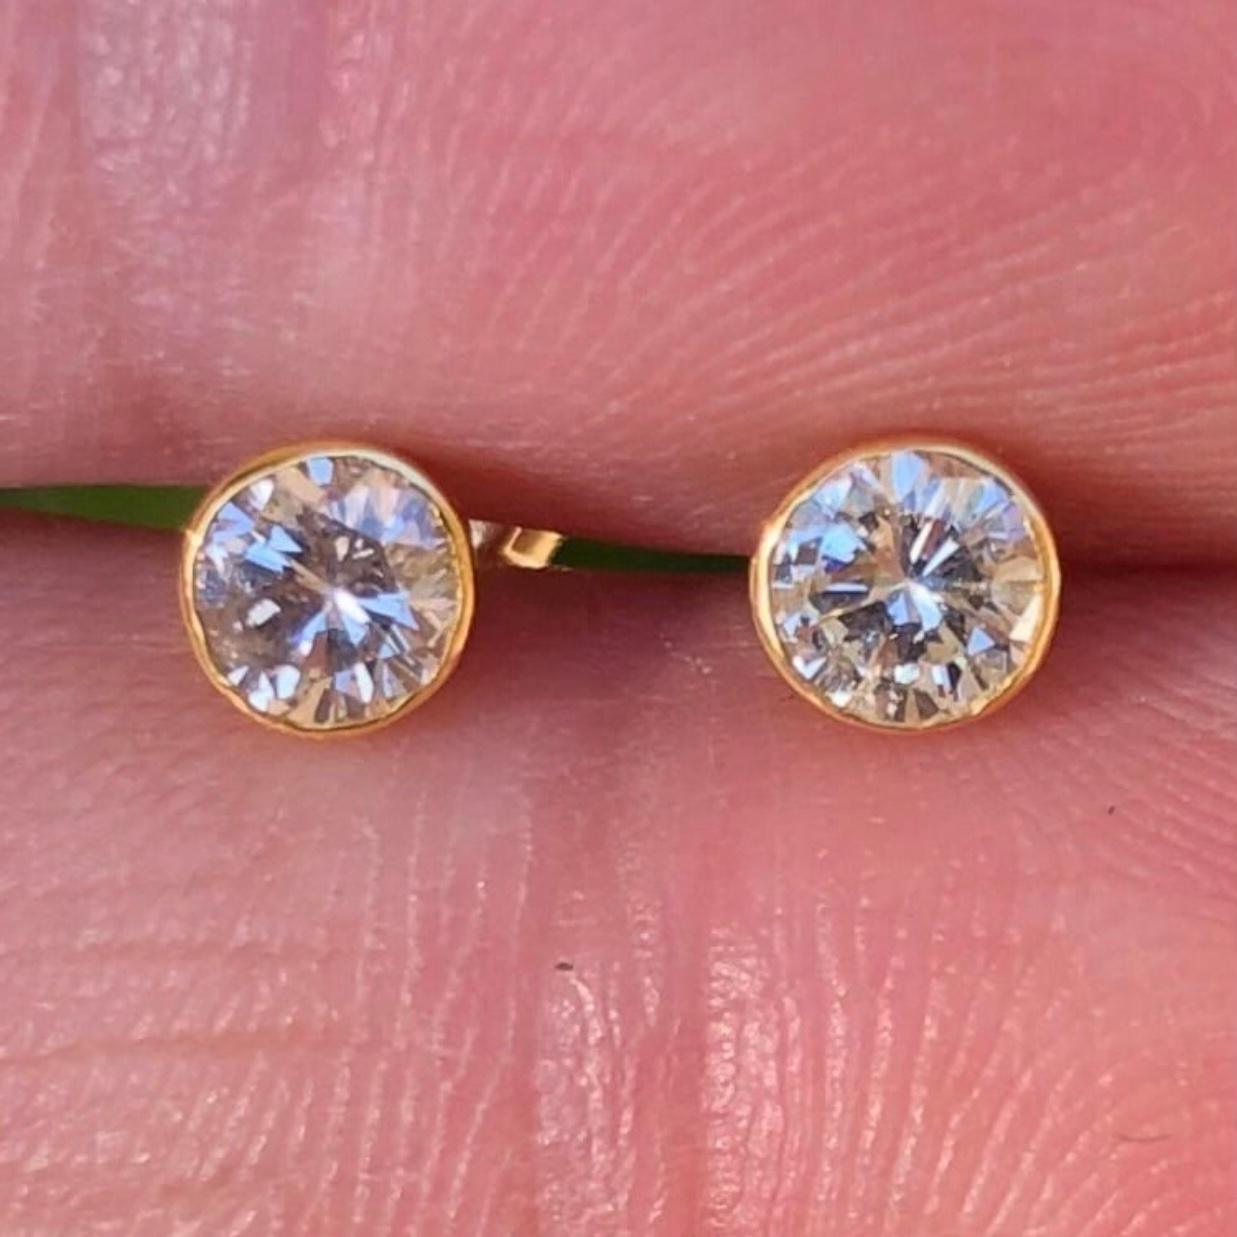 Classic .7 carat solitaire diamond stud earrings in 14k yellow gold. Pair of natural earth-mined round brilliant diamonds weighing approx. .7 carats are bezel set in these 14K gold basket studs.

Diamond stud earrings come with solid 14k gold push